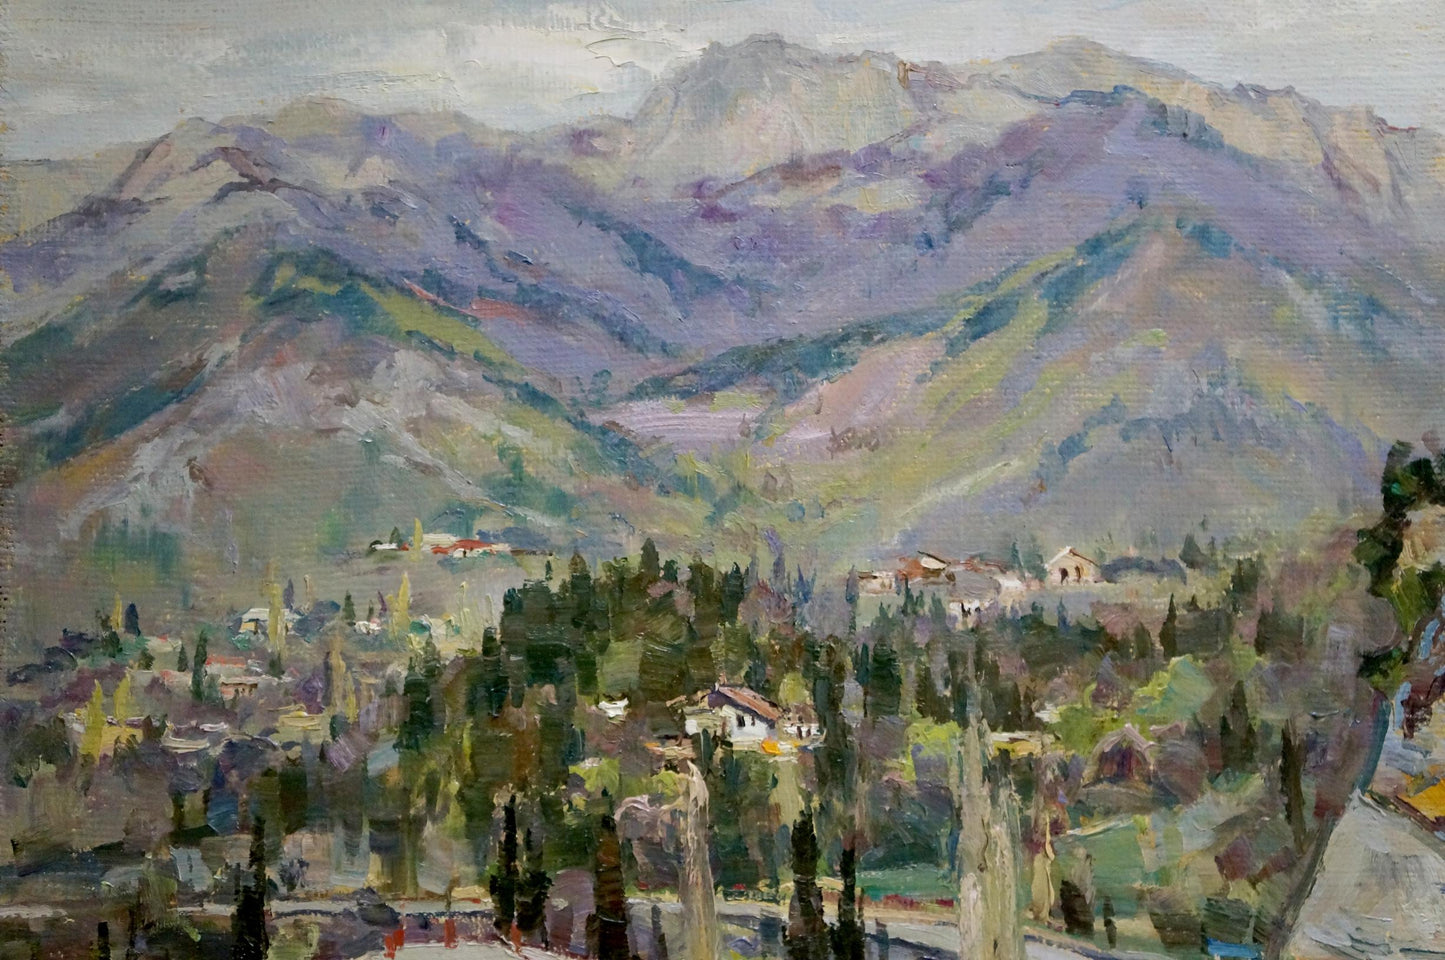 Unknown artist's portrayal of a city nestled among the mountains in oil